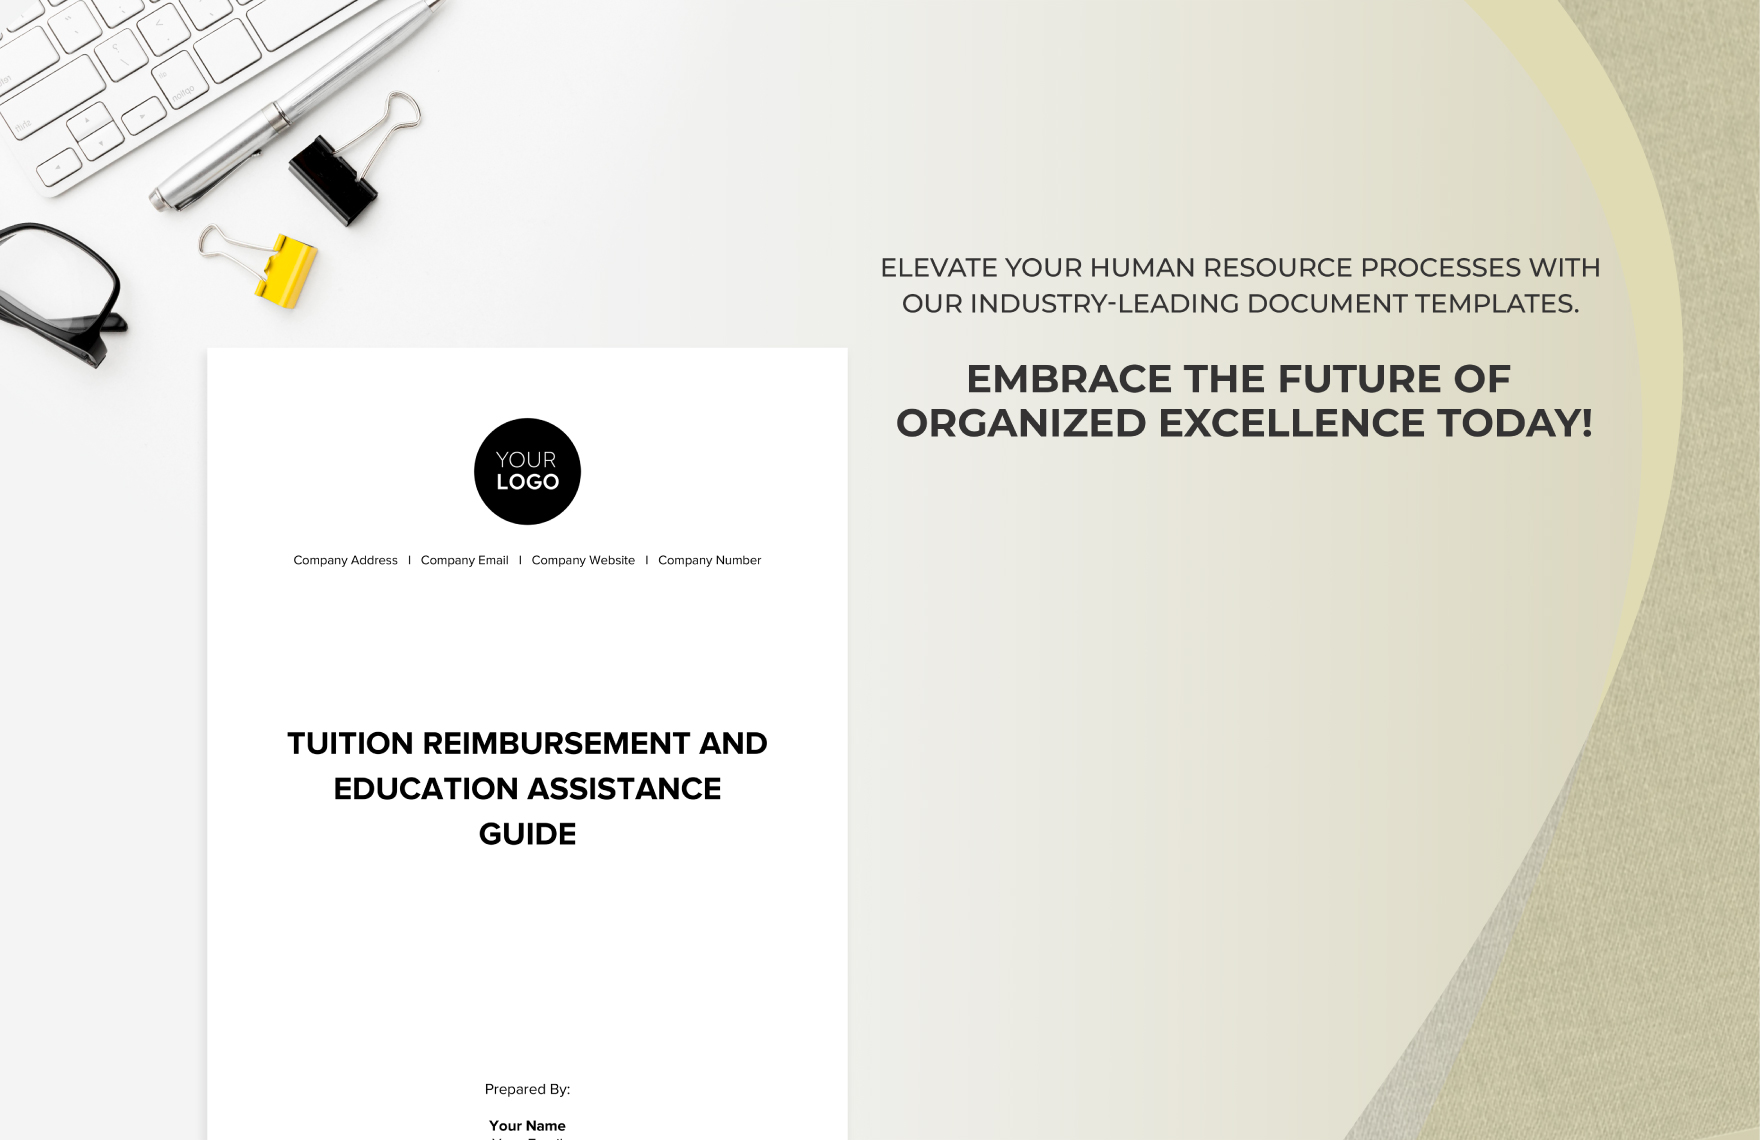 Tuition Reimbursement and Education Assistance Guide HR Template